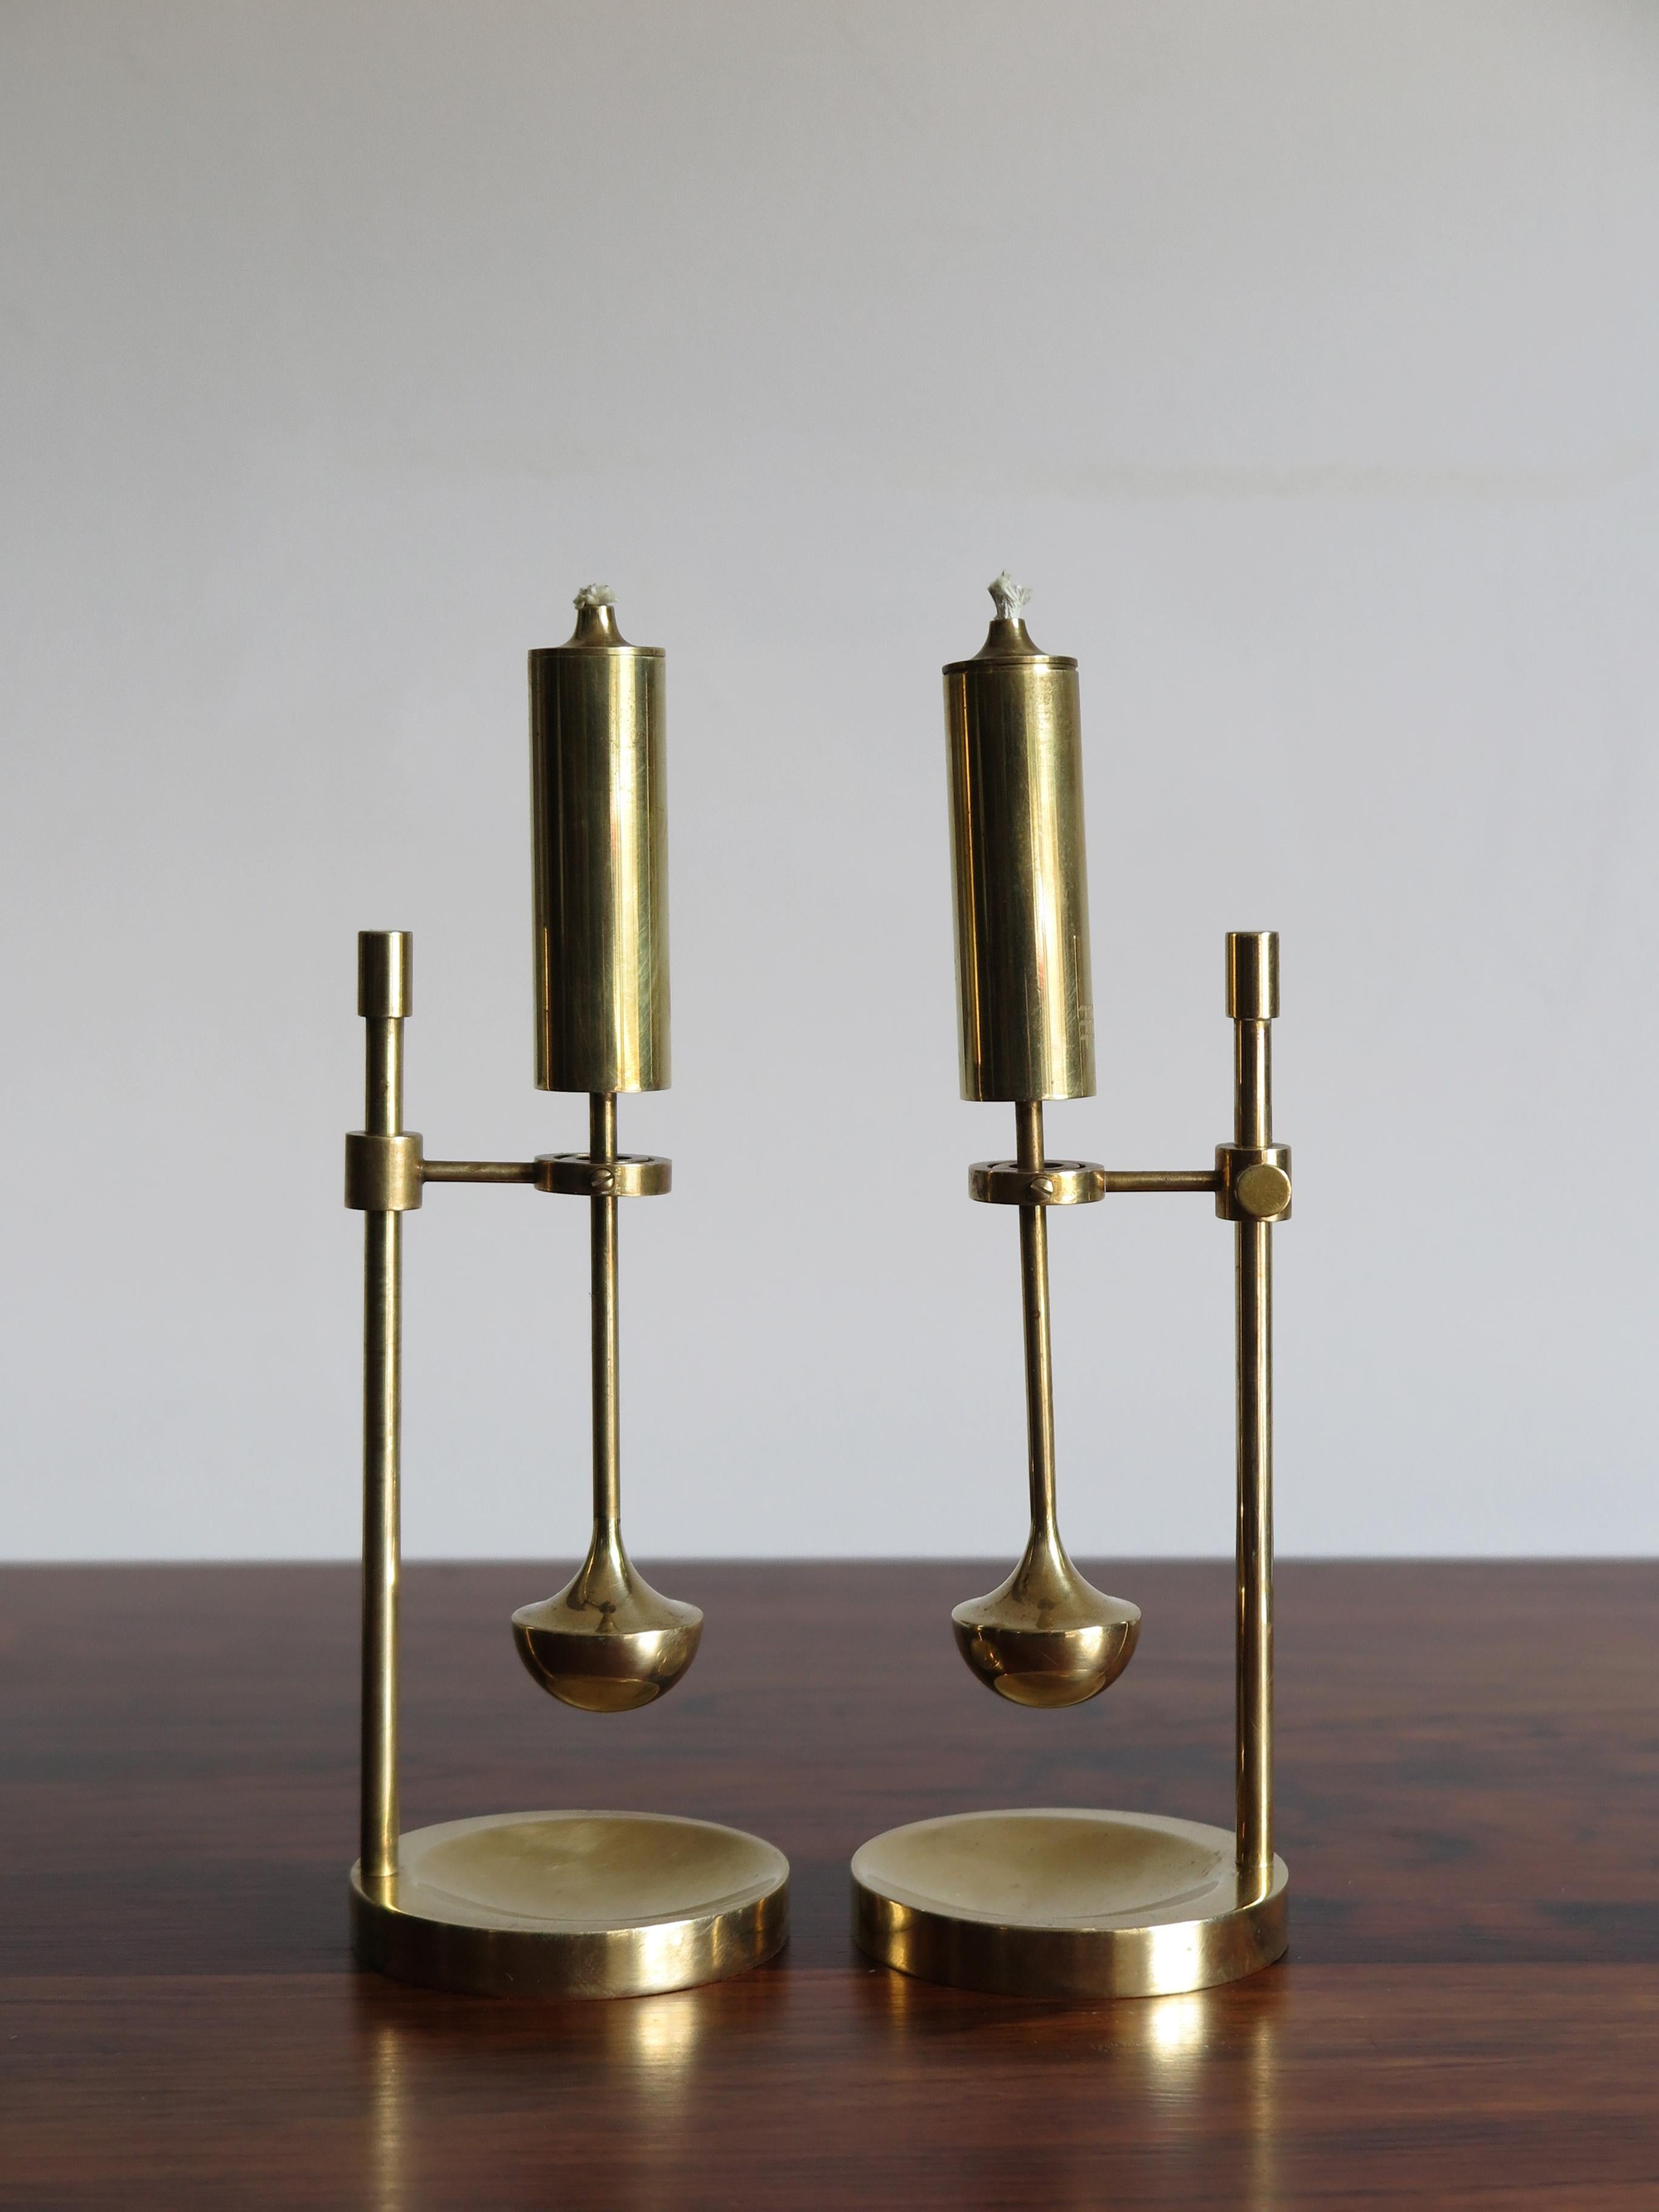 Daproma Denmark Ilse D. Ammonsen design brass ship oil lamps, adjustable height and flame, brass metal and oil wick , circa 1950s
Signed under the base.

Please note that the lamps are original of the period and this shows normal signs of age and